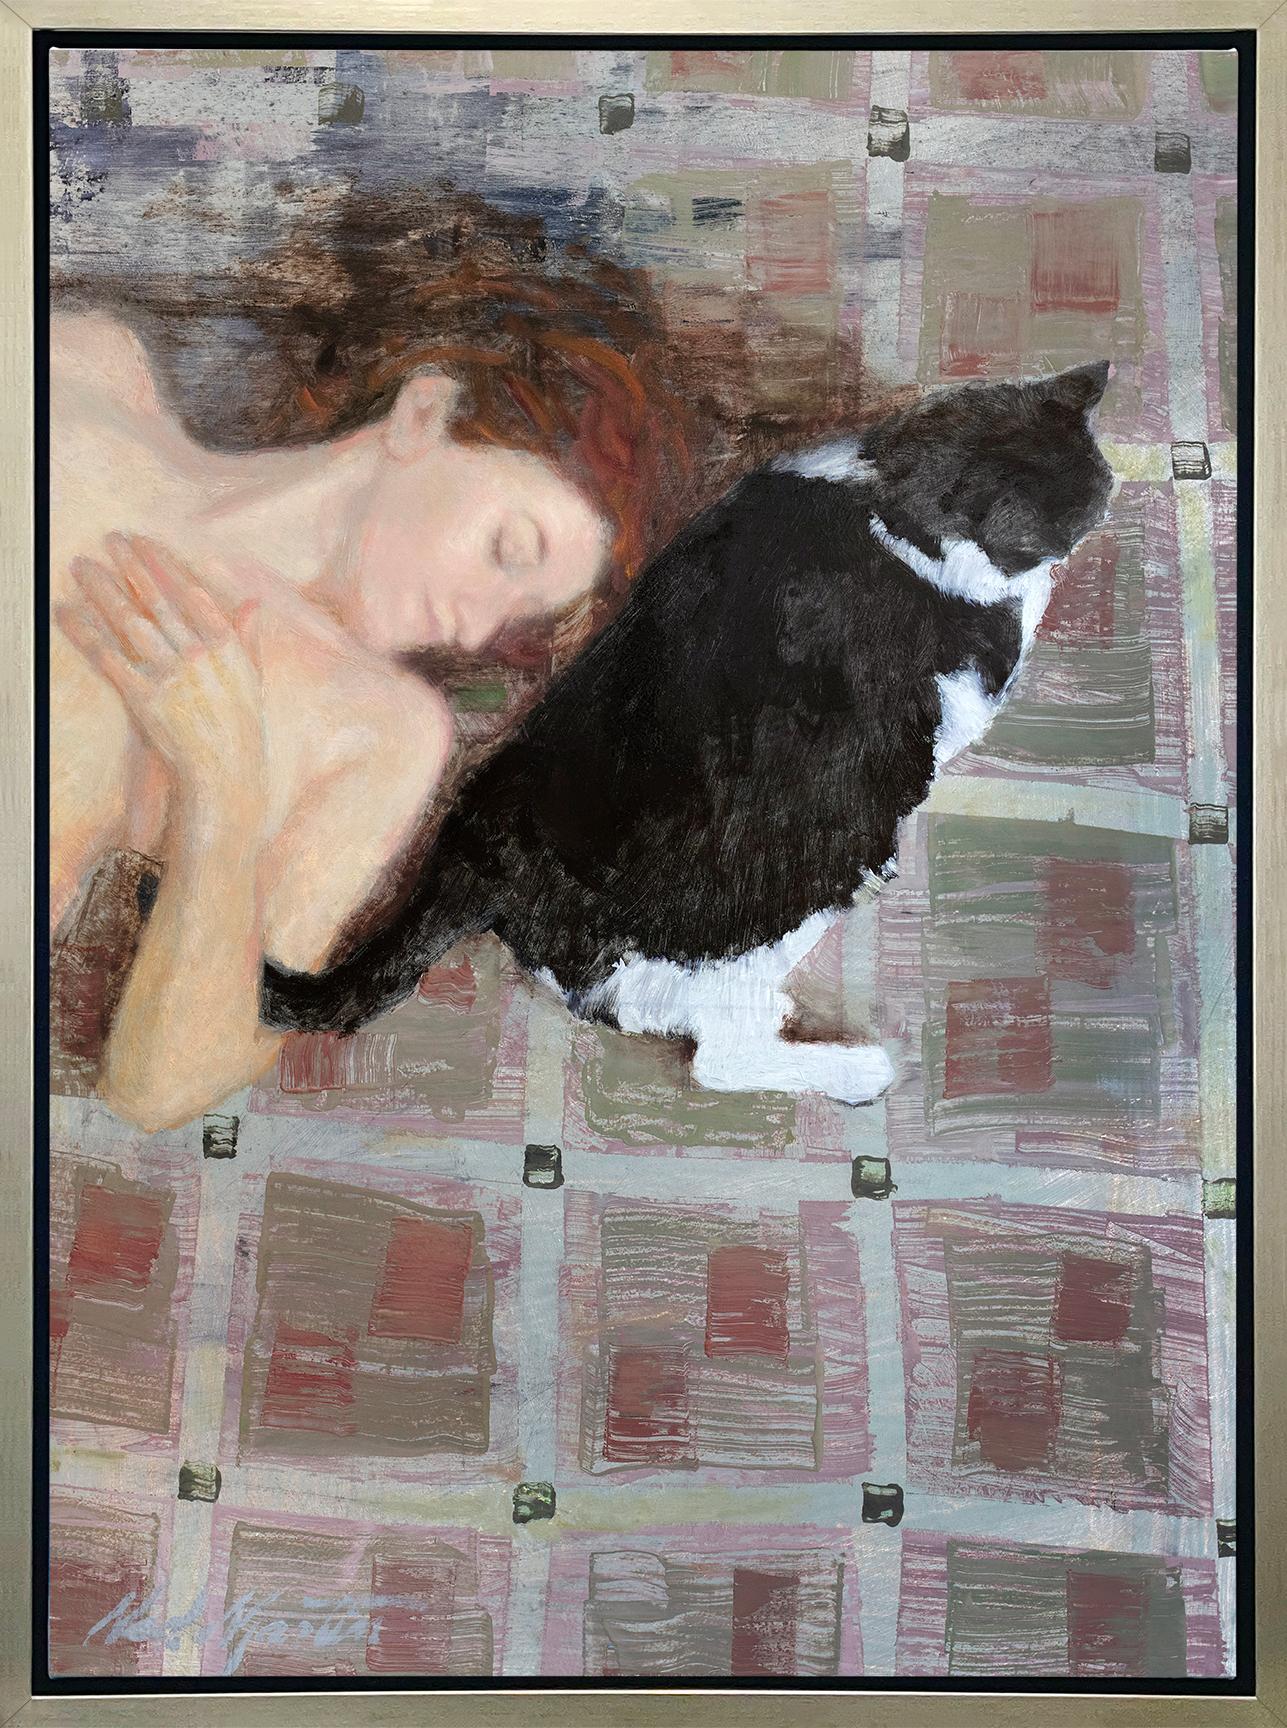 Ned Martin Figurative Print - "Lazy Day, " Framed Limited Edition Giclee Print, 32" x 24"